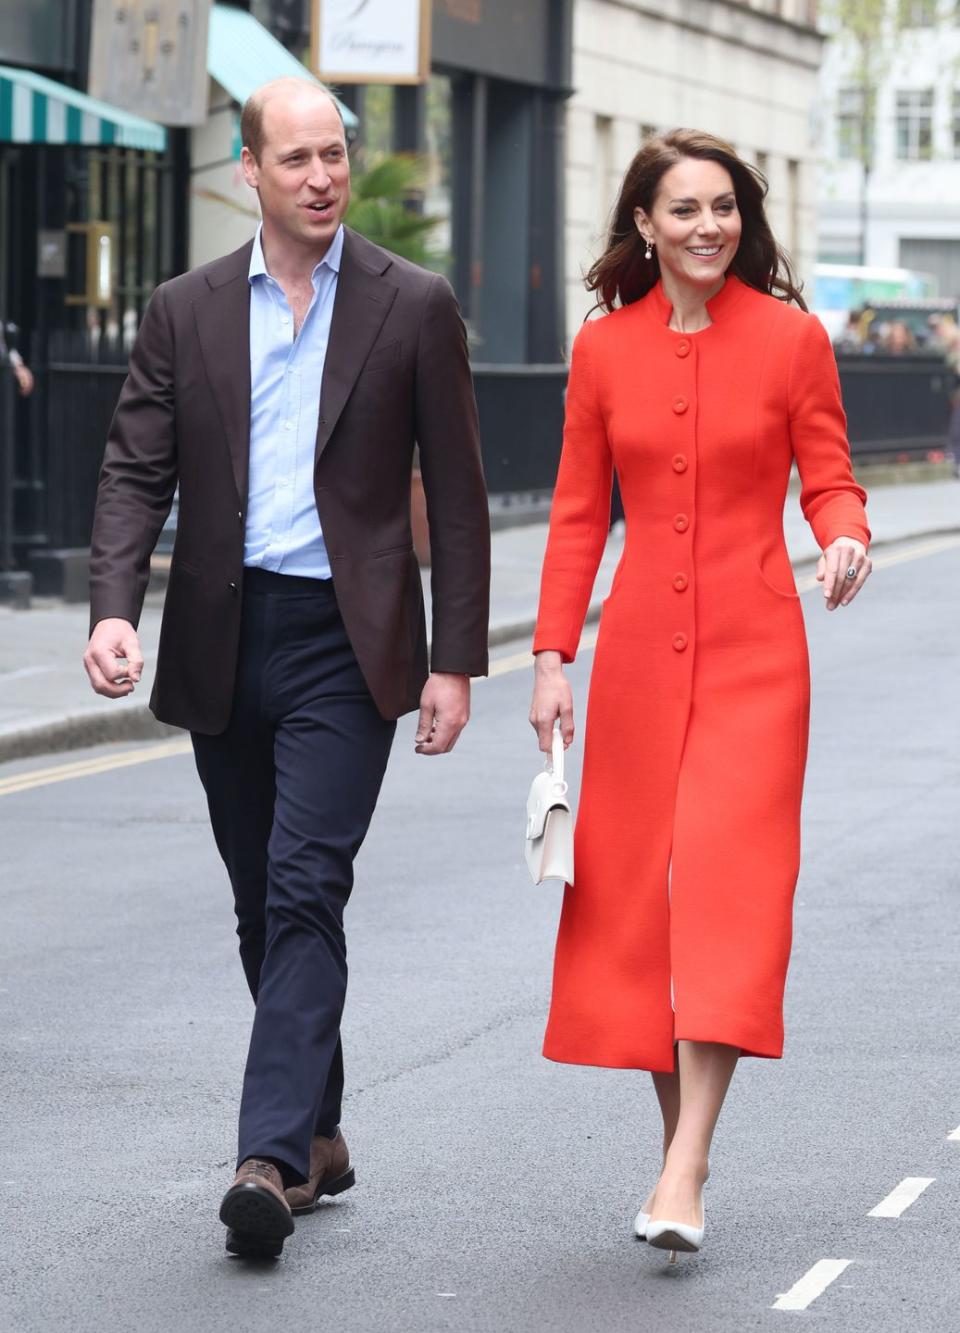 london, england may 04 prince william, prince of wales and catherine, princess of wales arrive at the dog duck pub to speak to members of staff to hear how it’s preparing for the coronation weekend during their visit to soho on may 04, 2023 in london, england photo by chris jacksongetty images